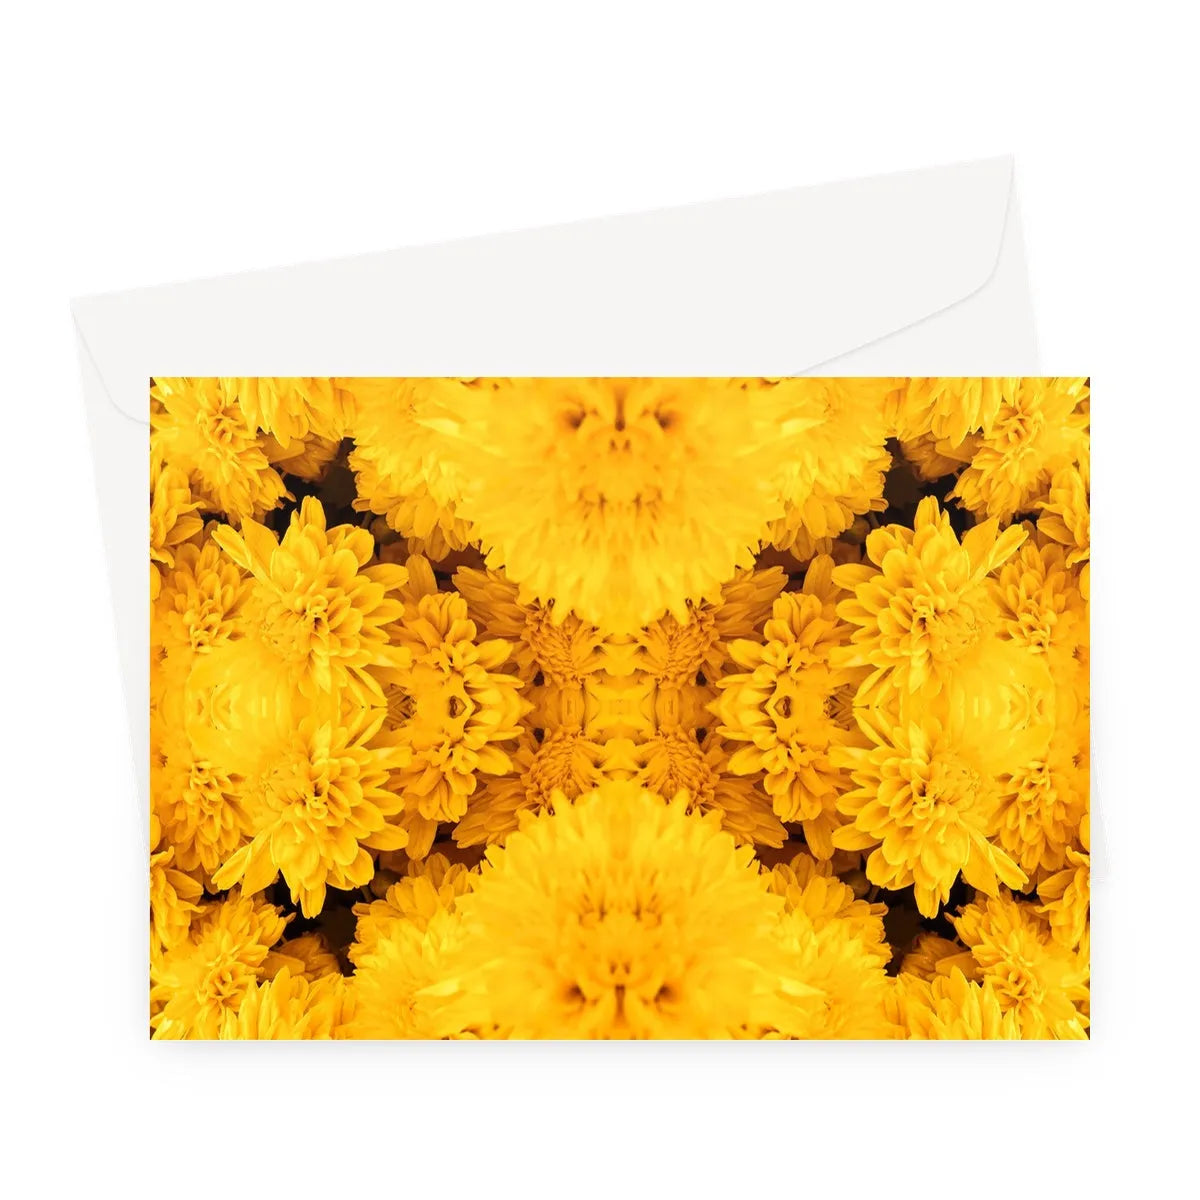 Gold Rush Greeting Card - A5 Landscape / 10 Cards - Greeting & Note Cards - Aesthetic Art